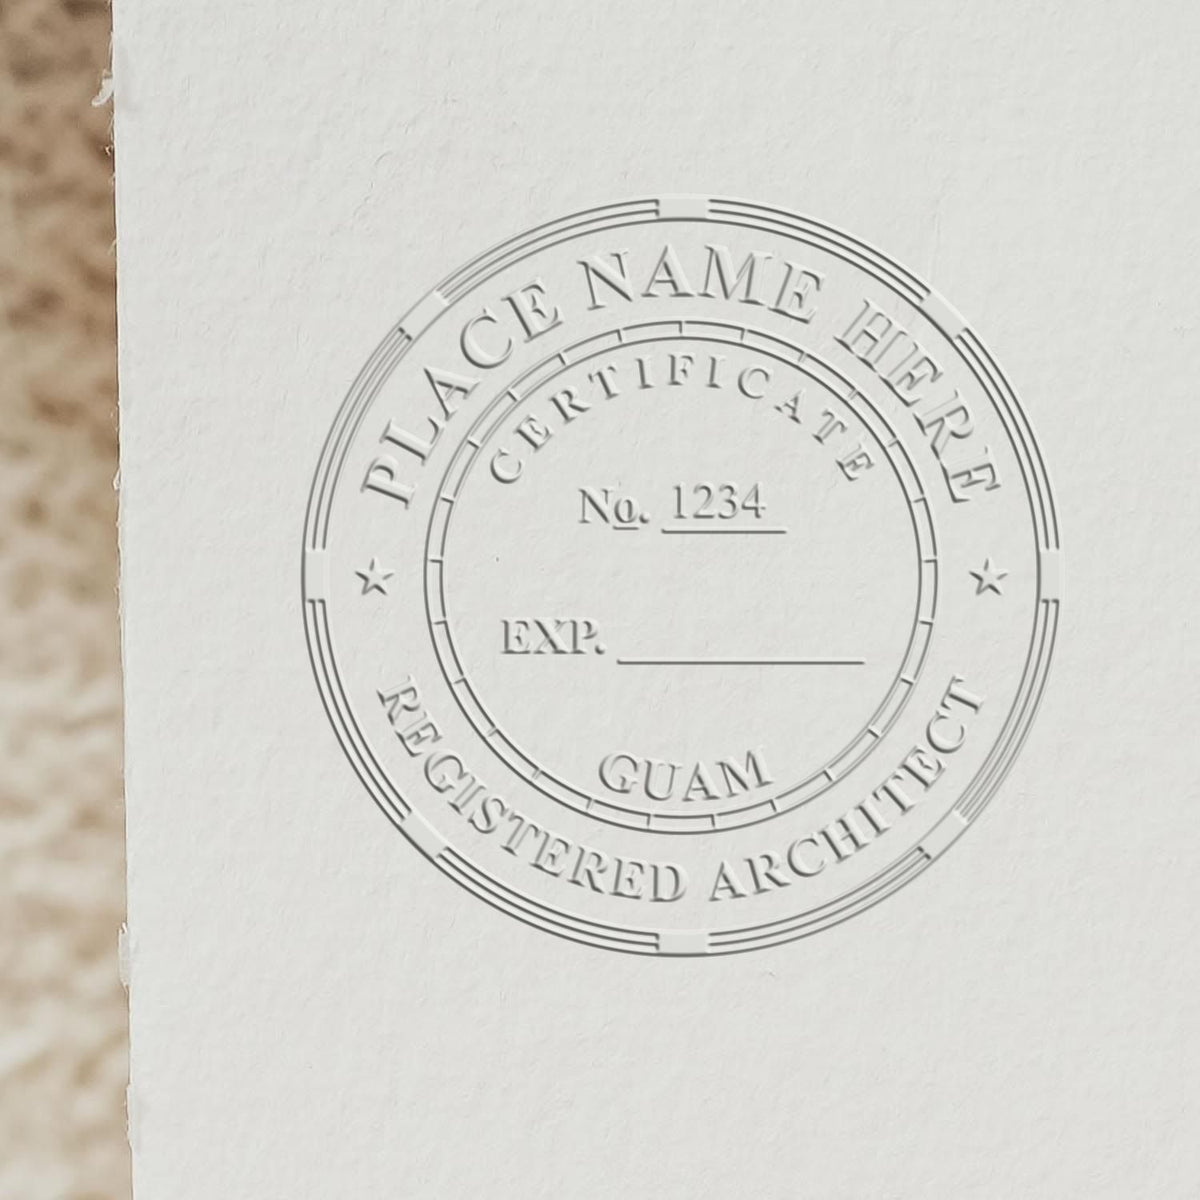 Another Example of a stamped impression of the Heavy Duty Cast Iron Guam Architect Embosser on a piece of office paper.